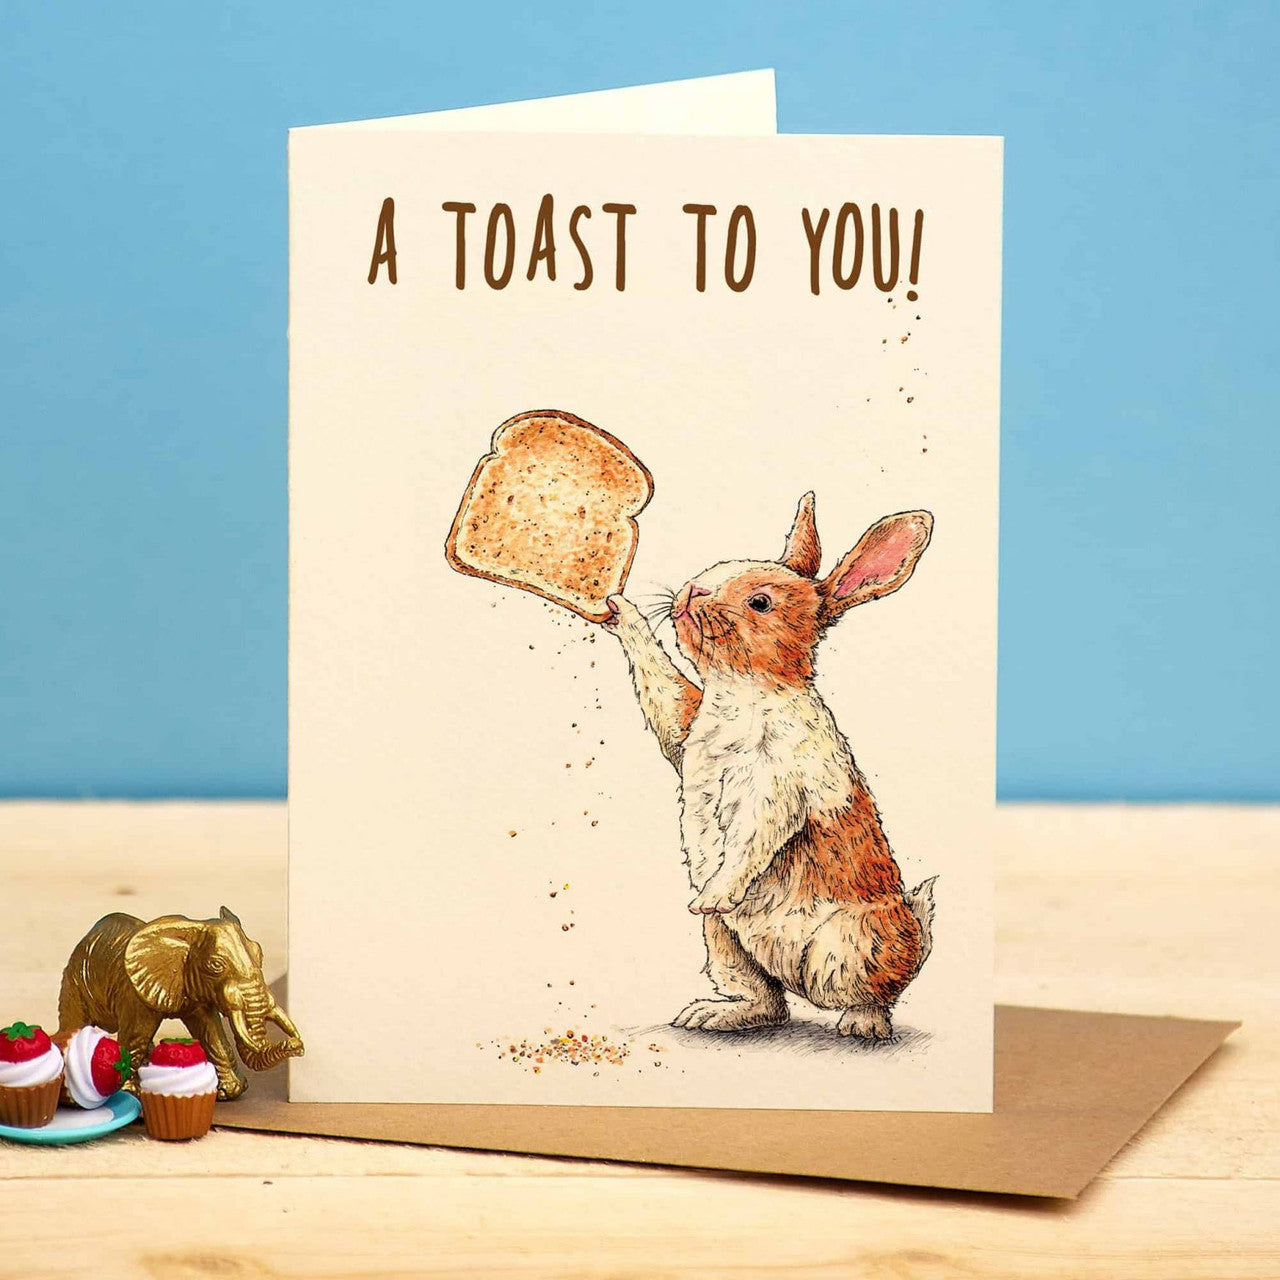 A Toast to You Greetings Card by Bewilderbeest.